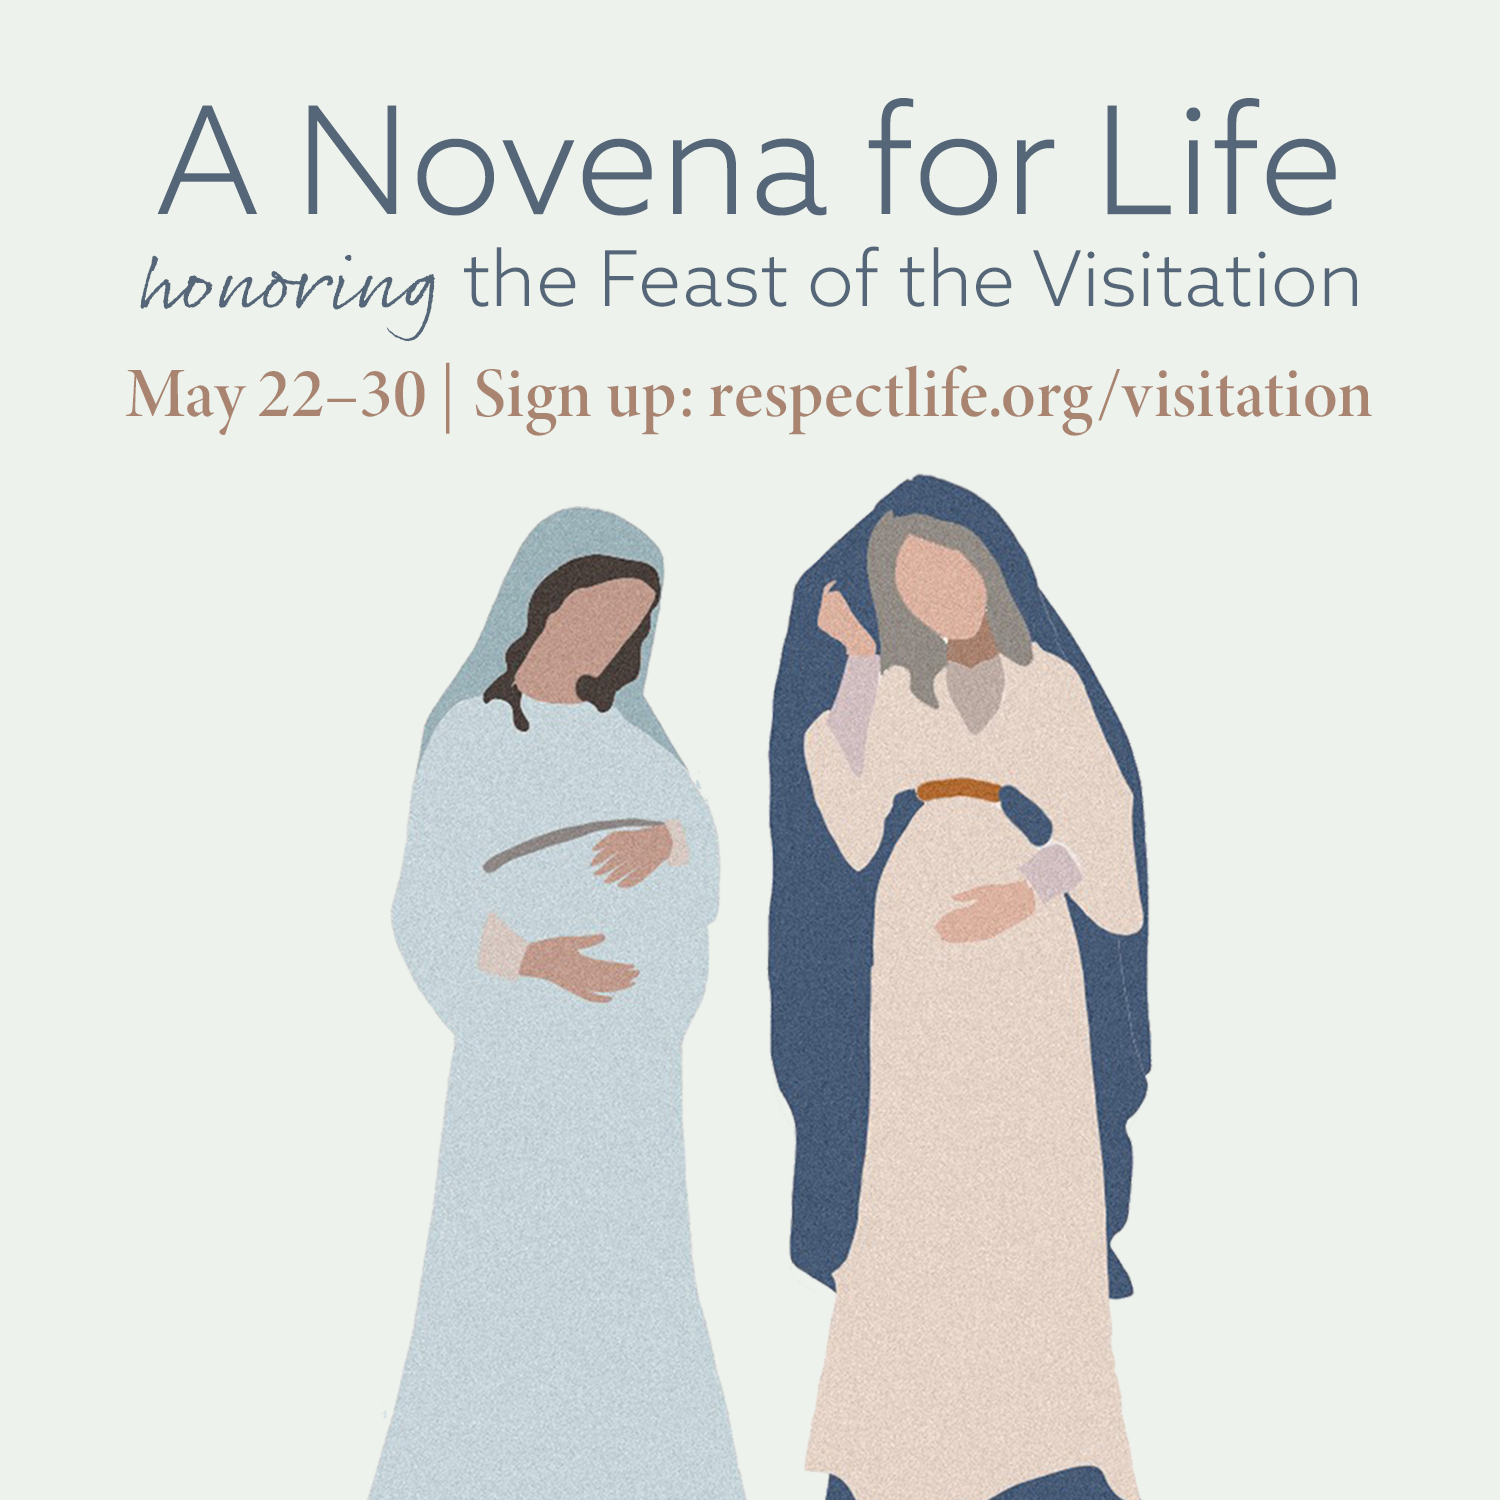 A Novena for Life honoring the Feast of the Visitation (May 22-30)